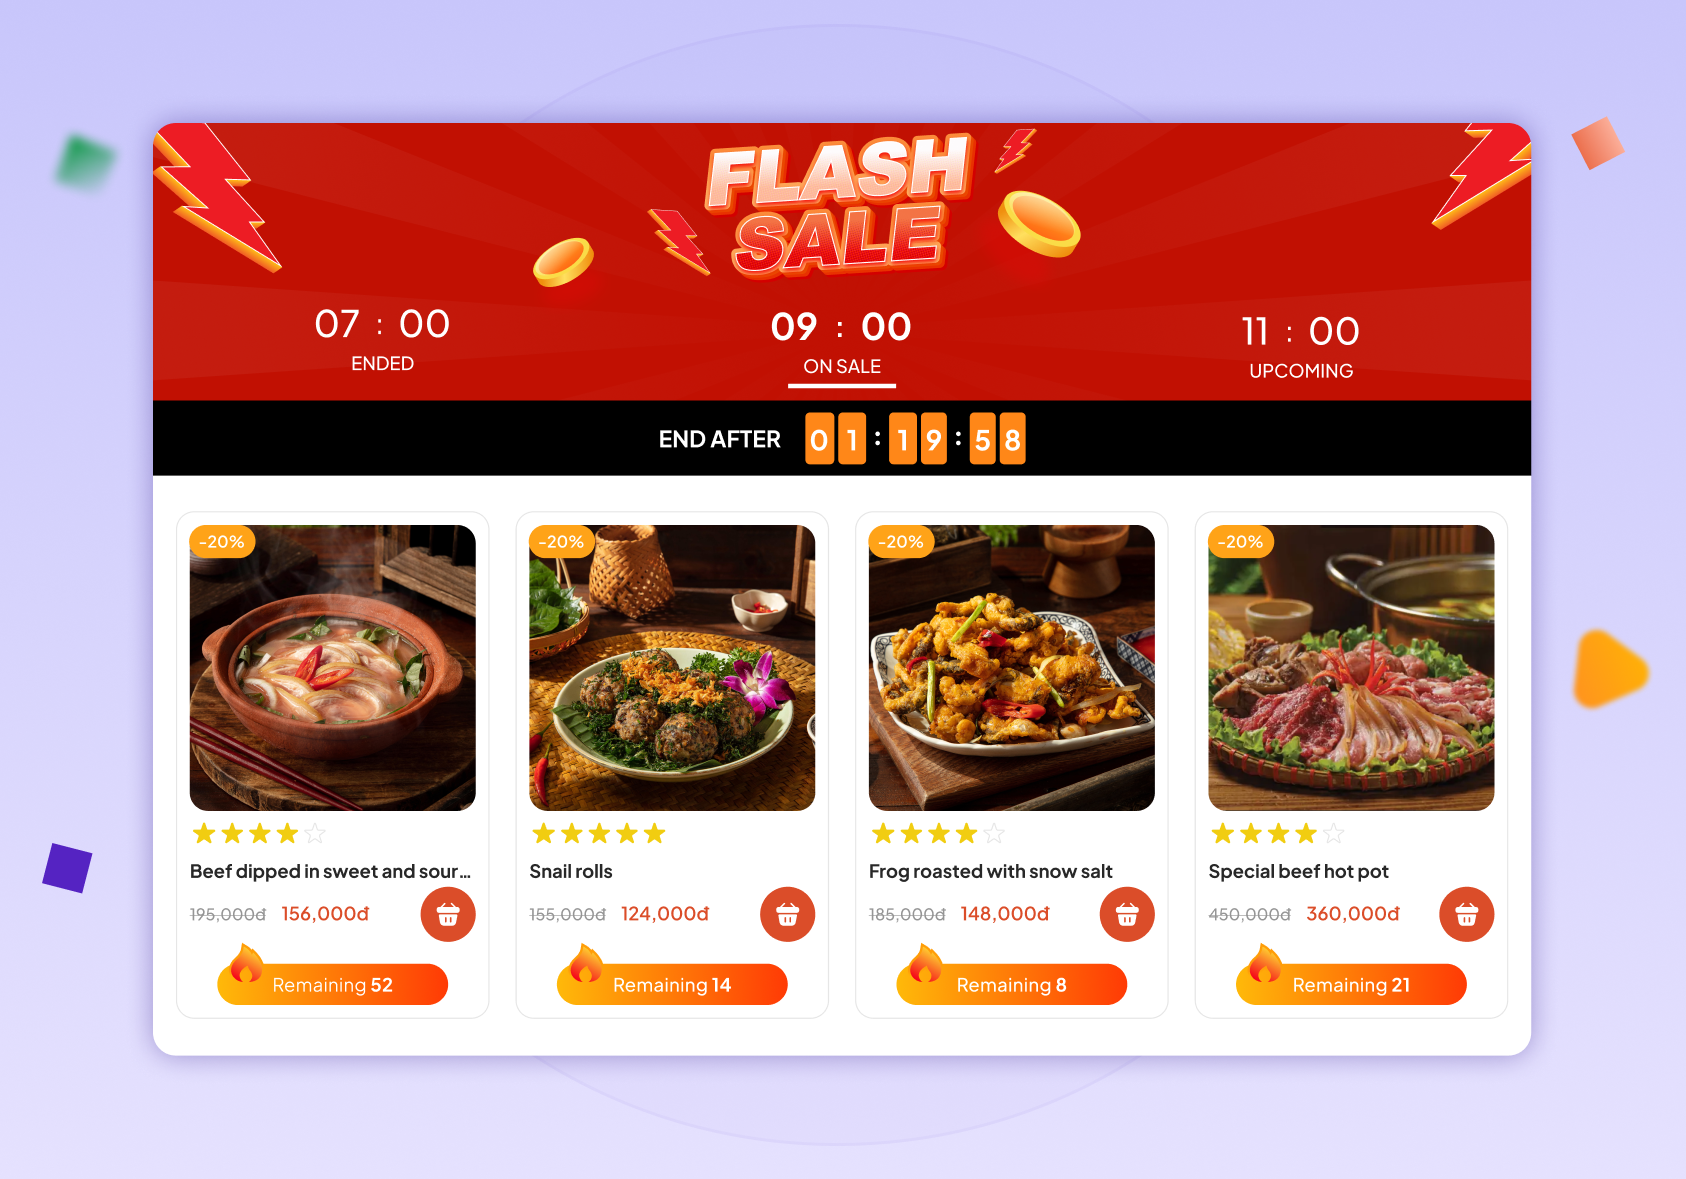 Sell more with flash sale